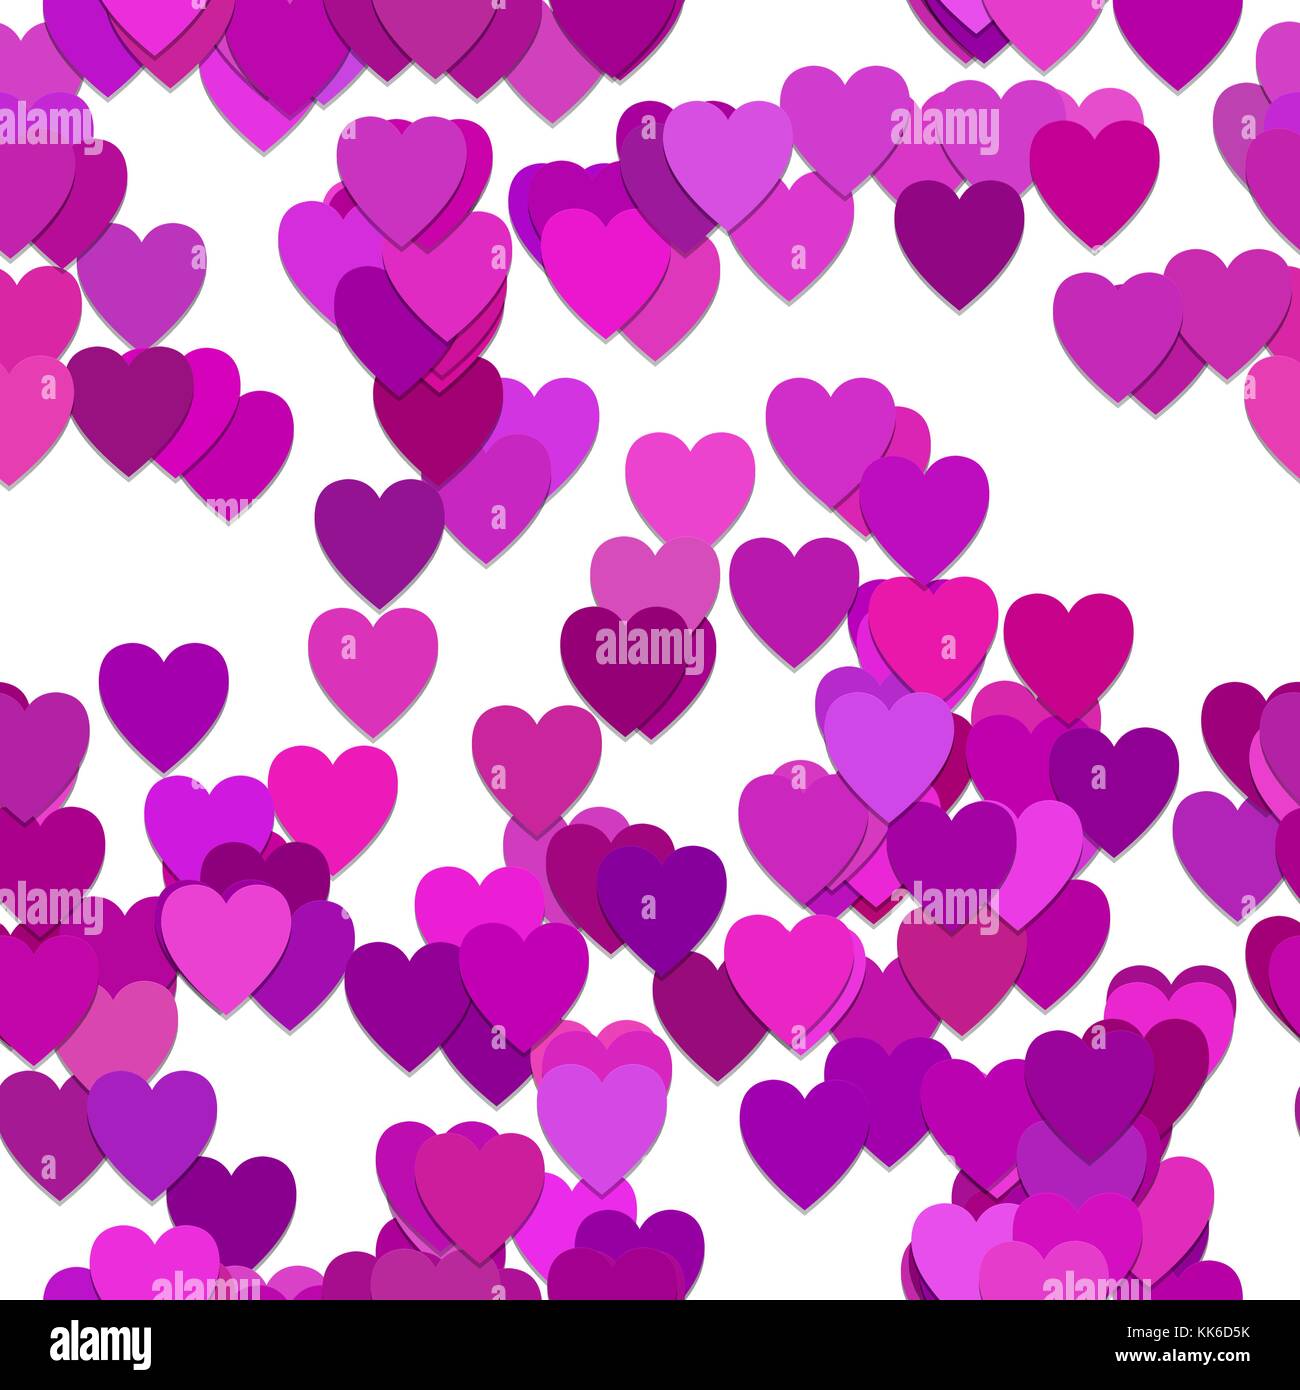 Seamless valentines day background pattern - vector illustration from purple hearts with shadow effect Stock Vector